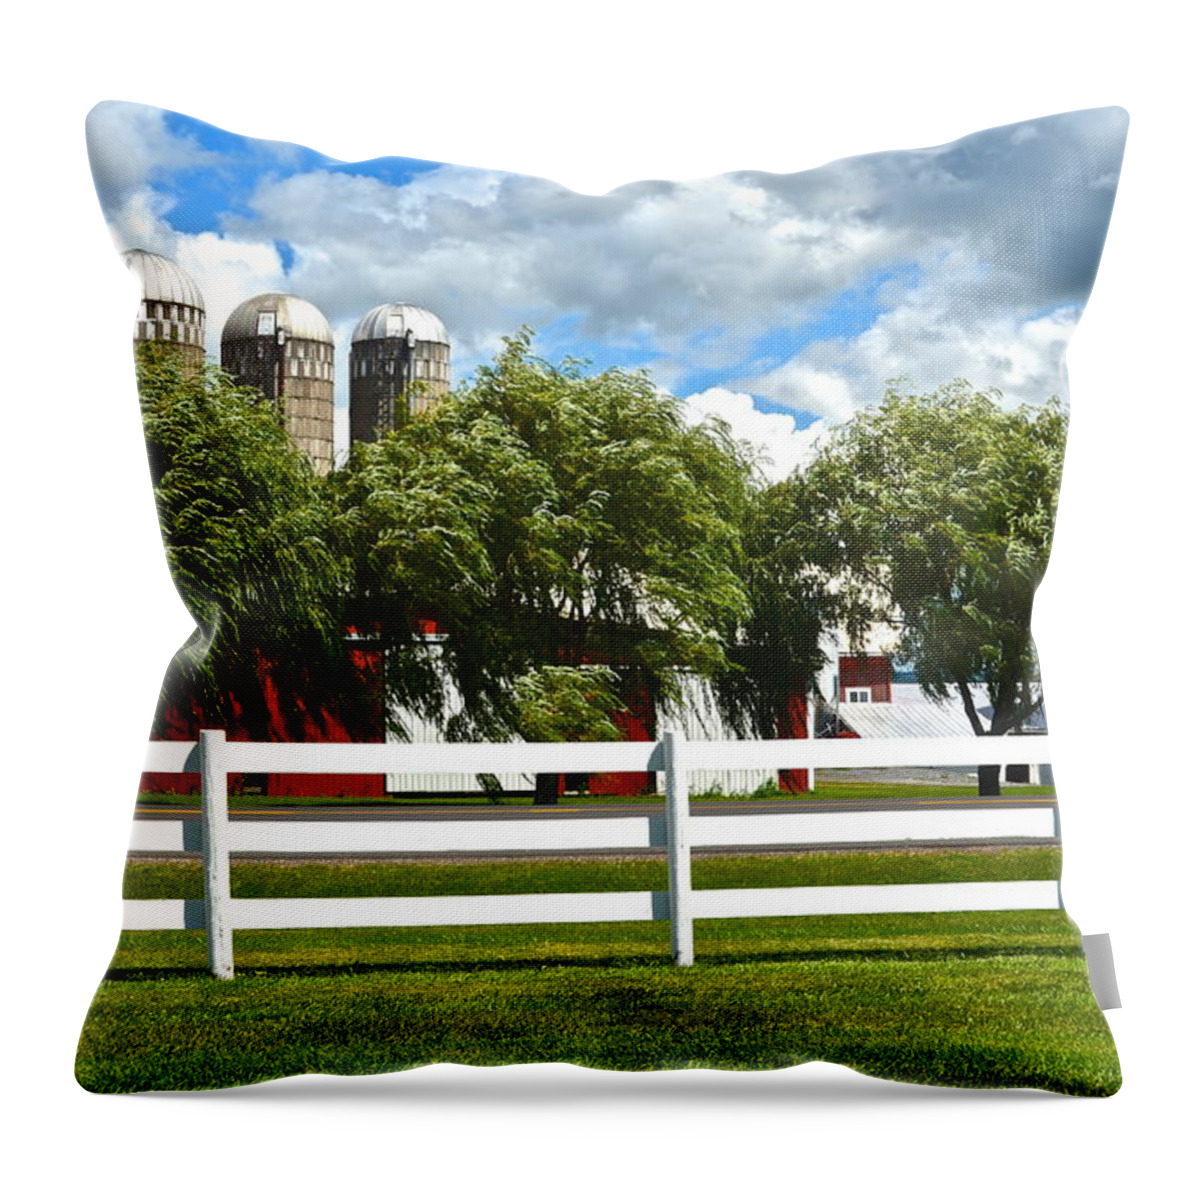 Landscape Throw Pillow featuring the photograph Serene Surroundings by Frozen in Time Fine Art Photography